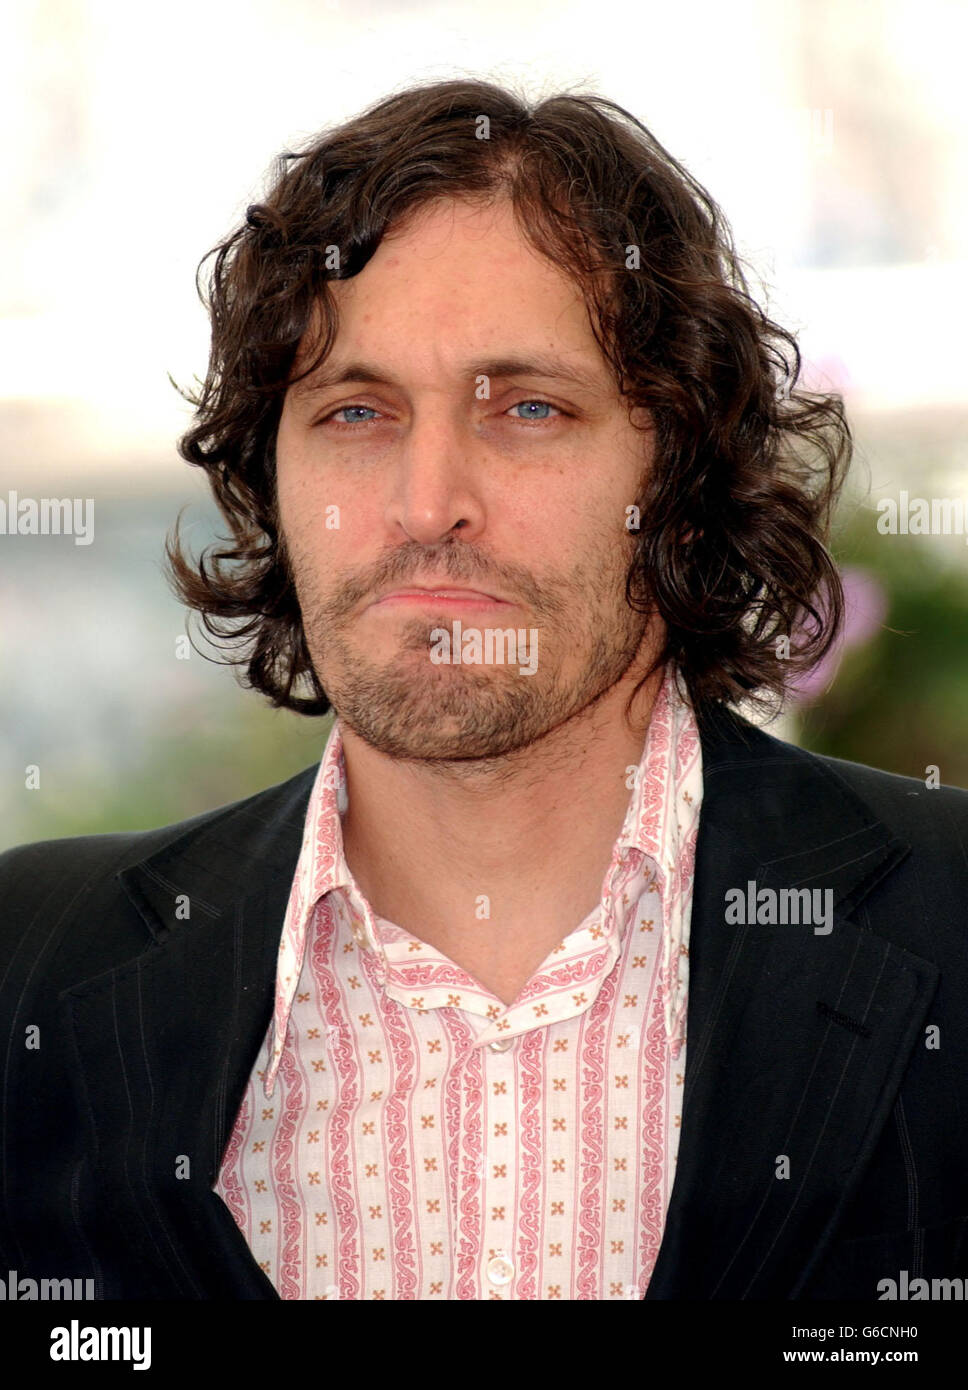 Actor/Director Vincent Gallo poses for photographers at the photocall for 'The Brown Bunny during the 56th Cannes film Festival in Cannes, France. Stock Photo